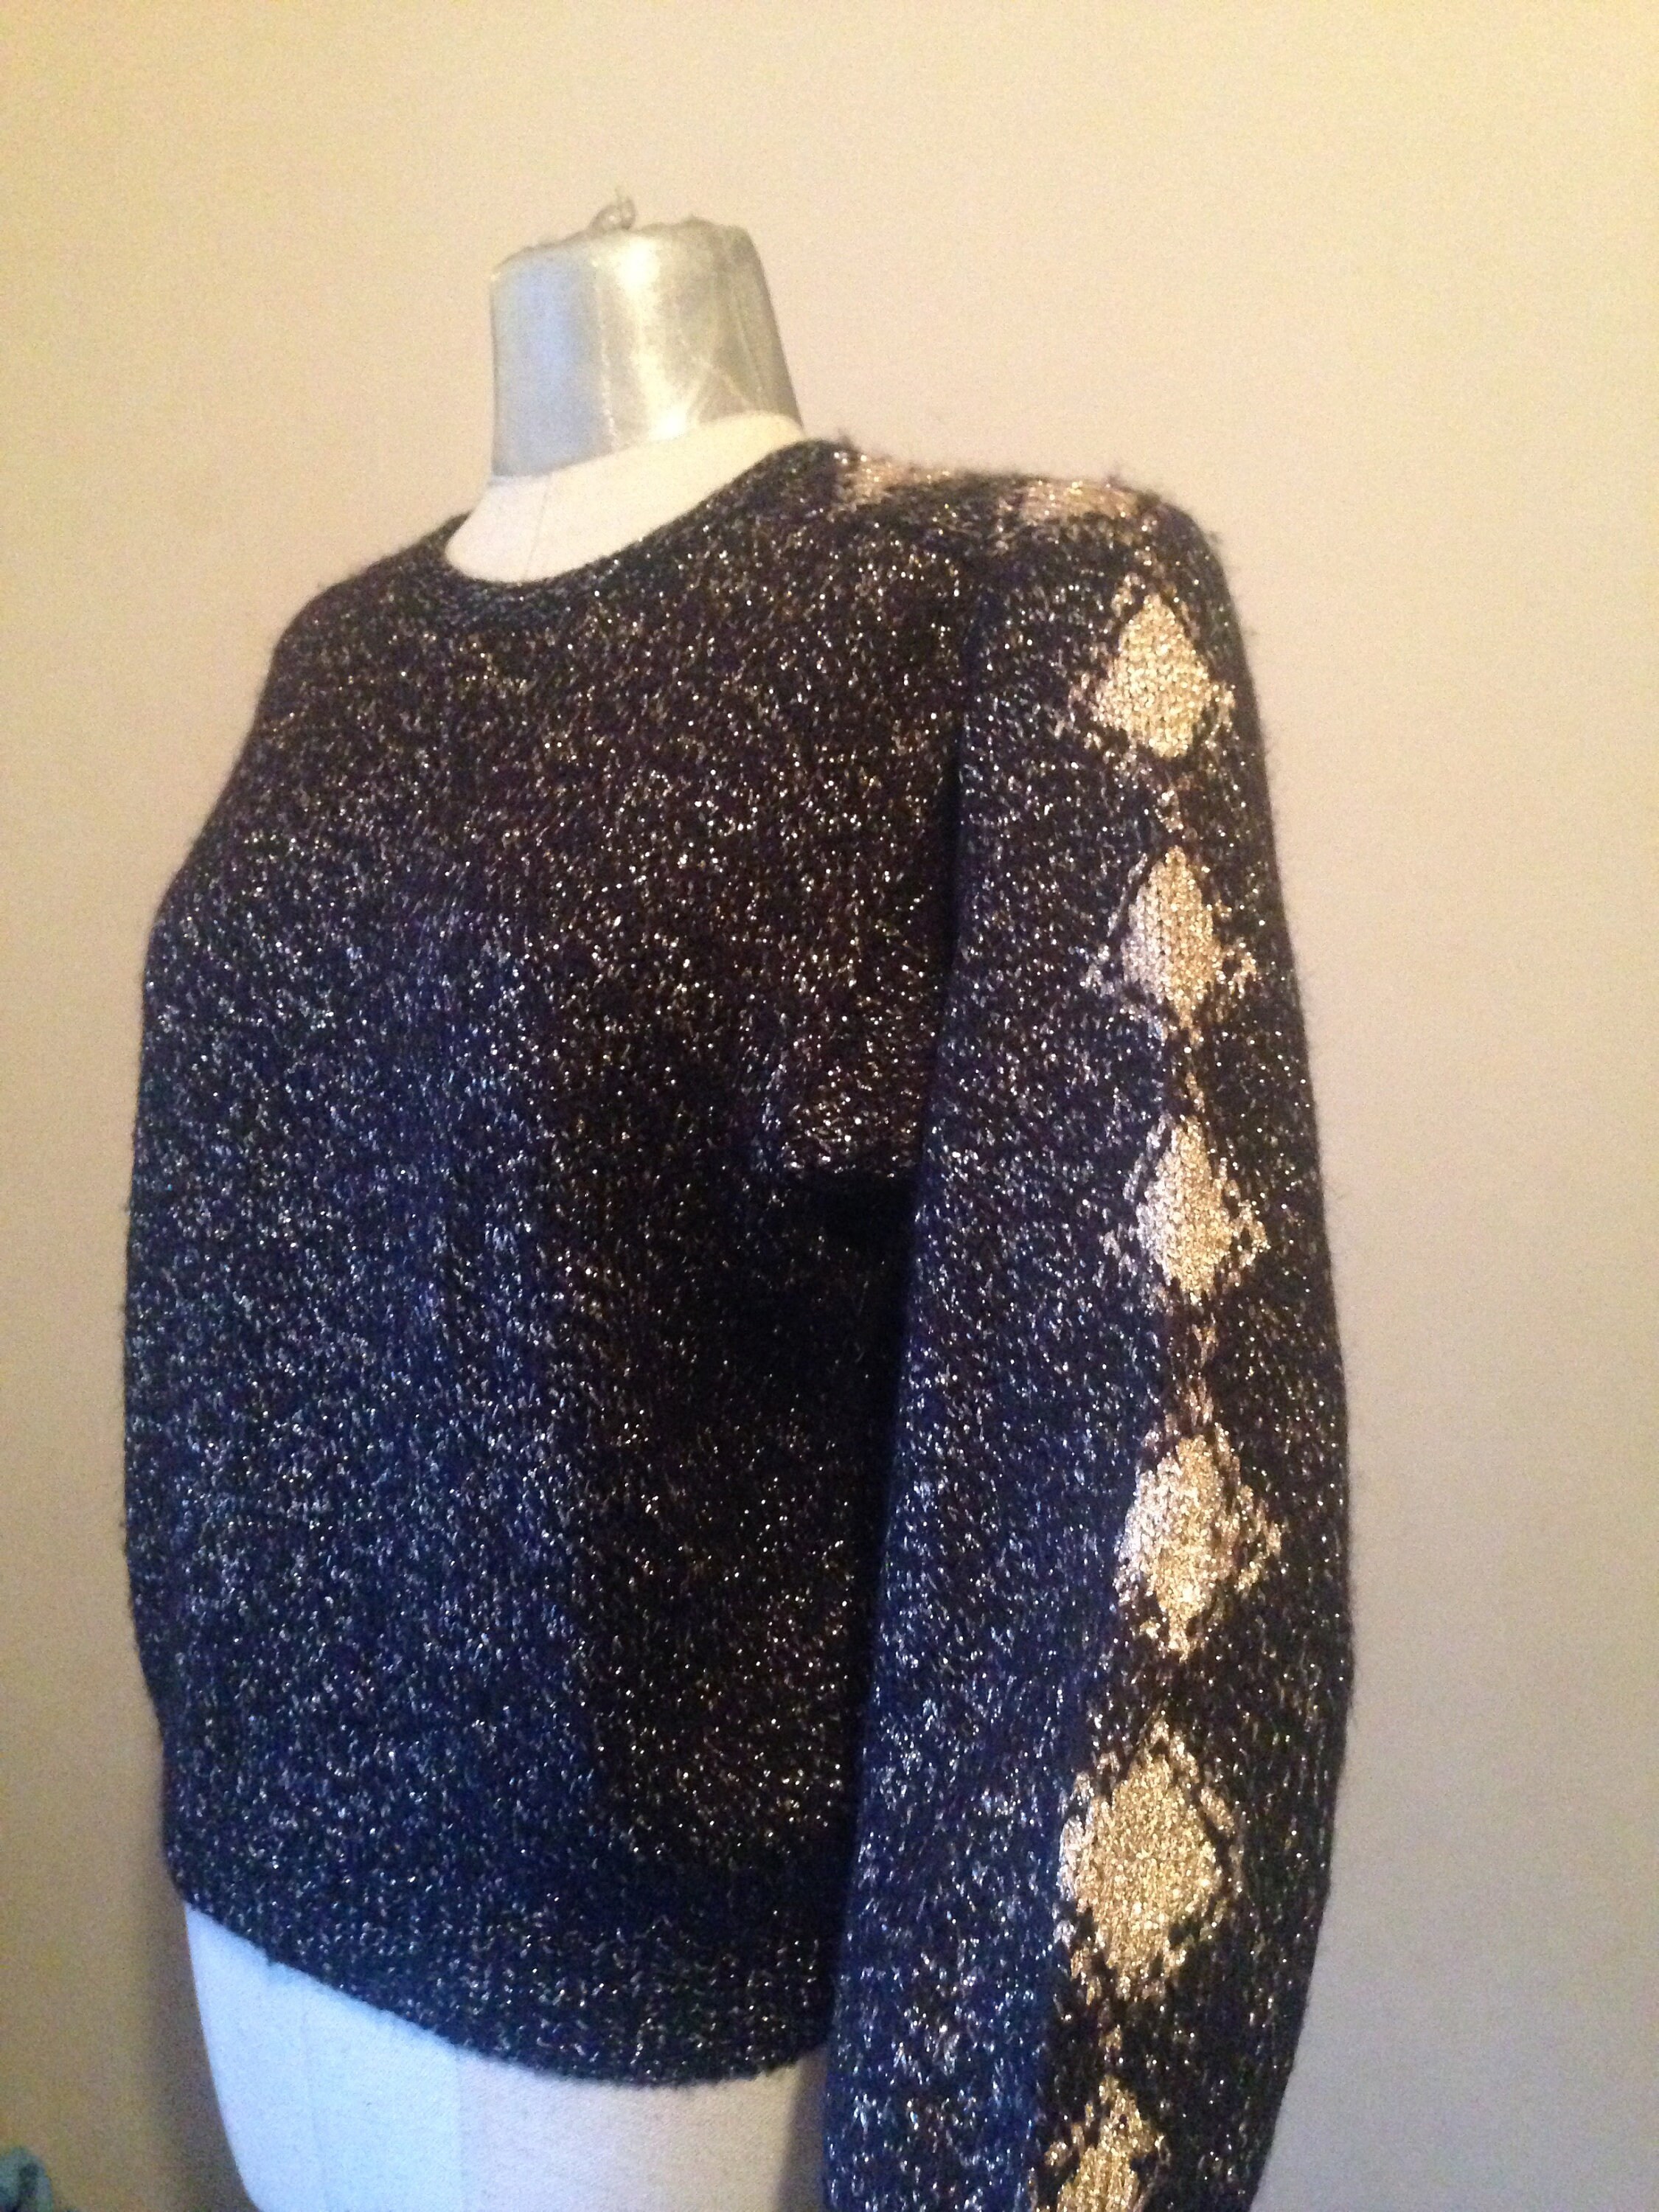 Krizia Charcoal & Gold 80s Vintage Sweater With Diamond Detail | Etsy